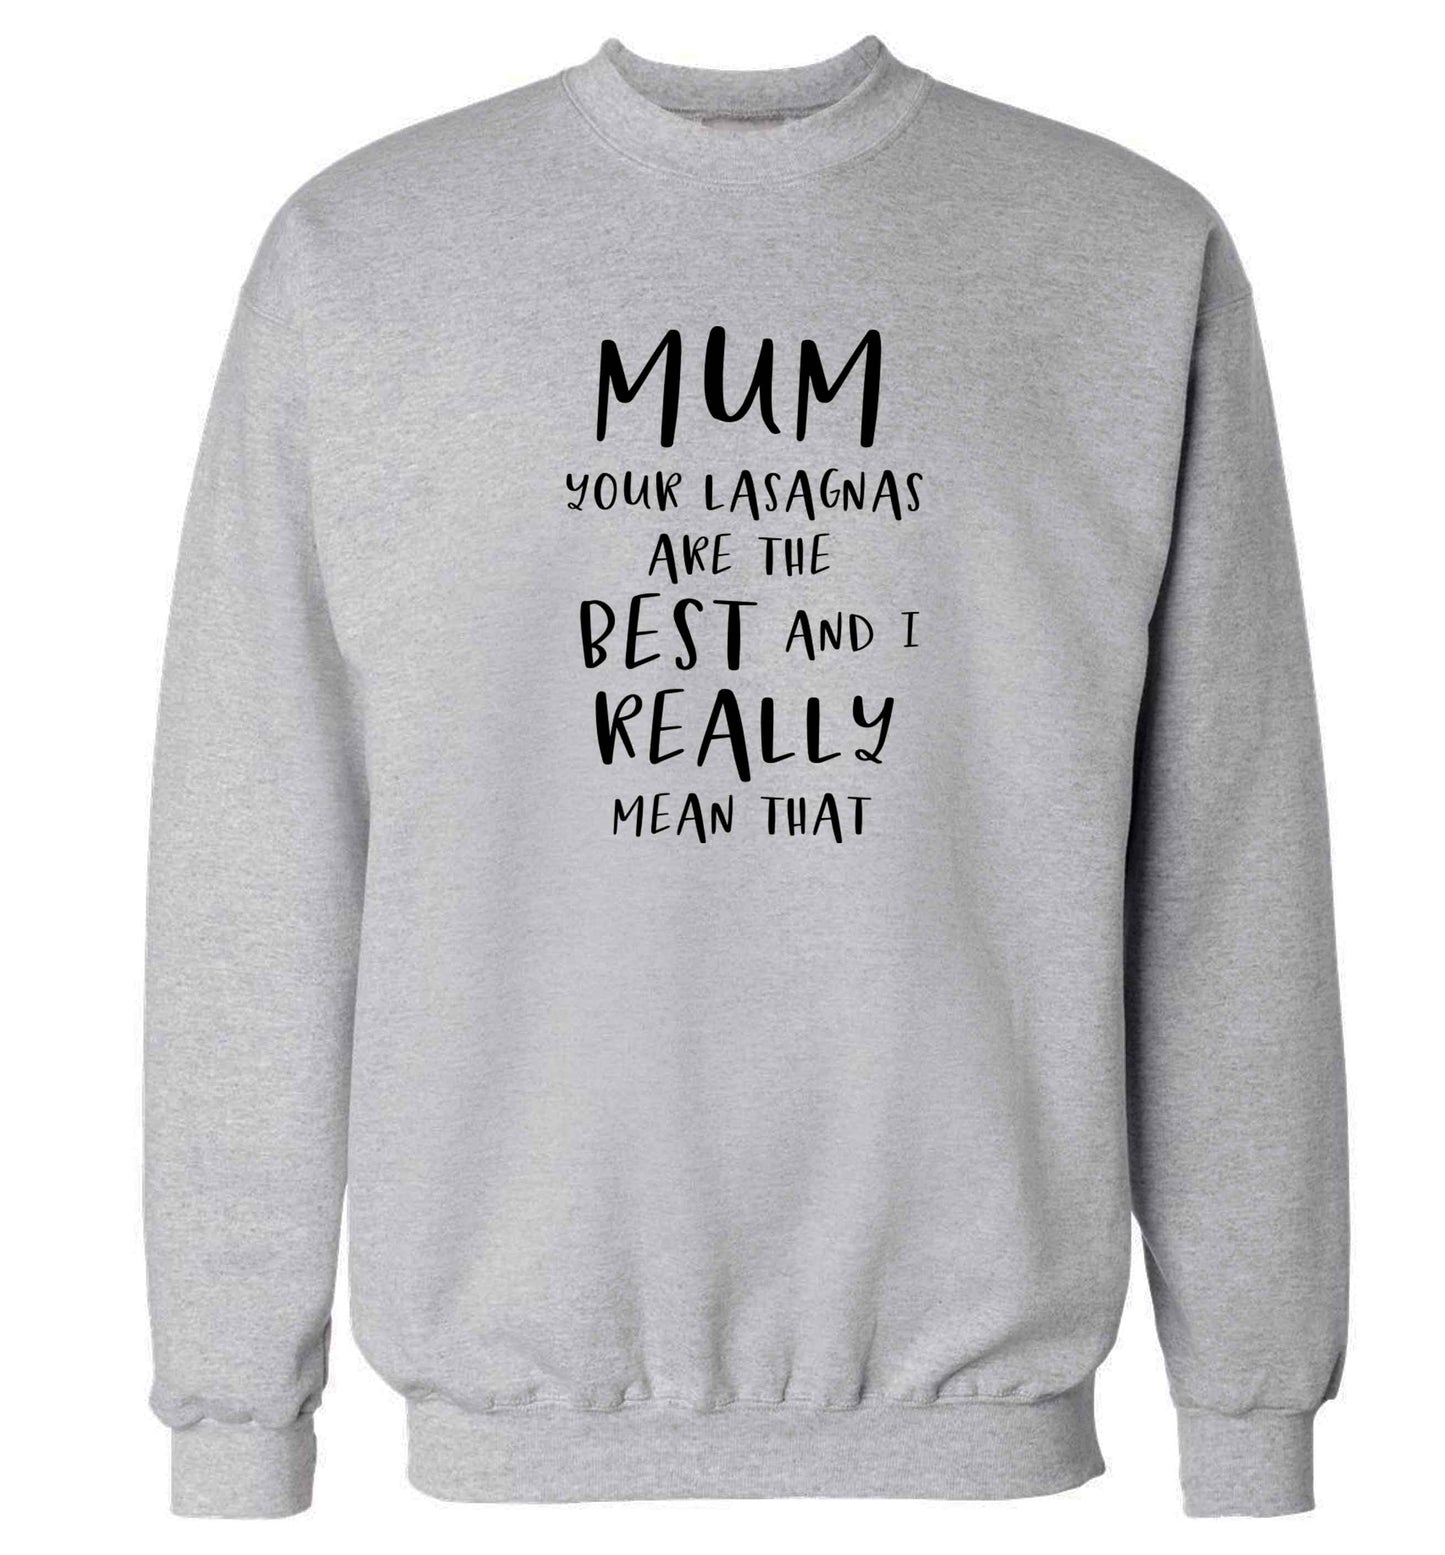 Funny gifts for your mum on mother's dayor her birthday! Mum your lasagnas are the best and I really mean that adult's unisex grey sweater 2XL